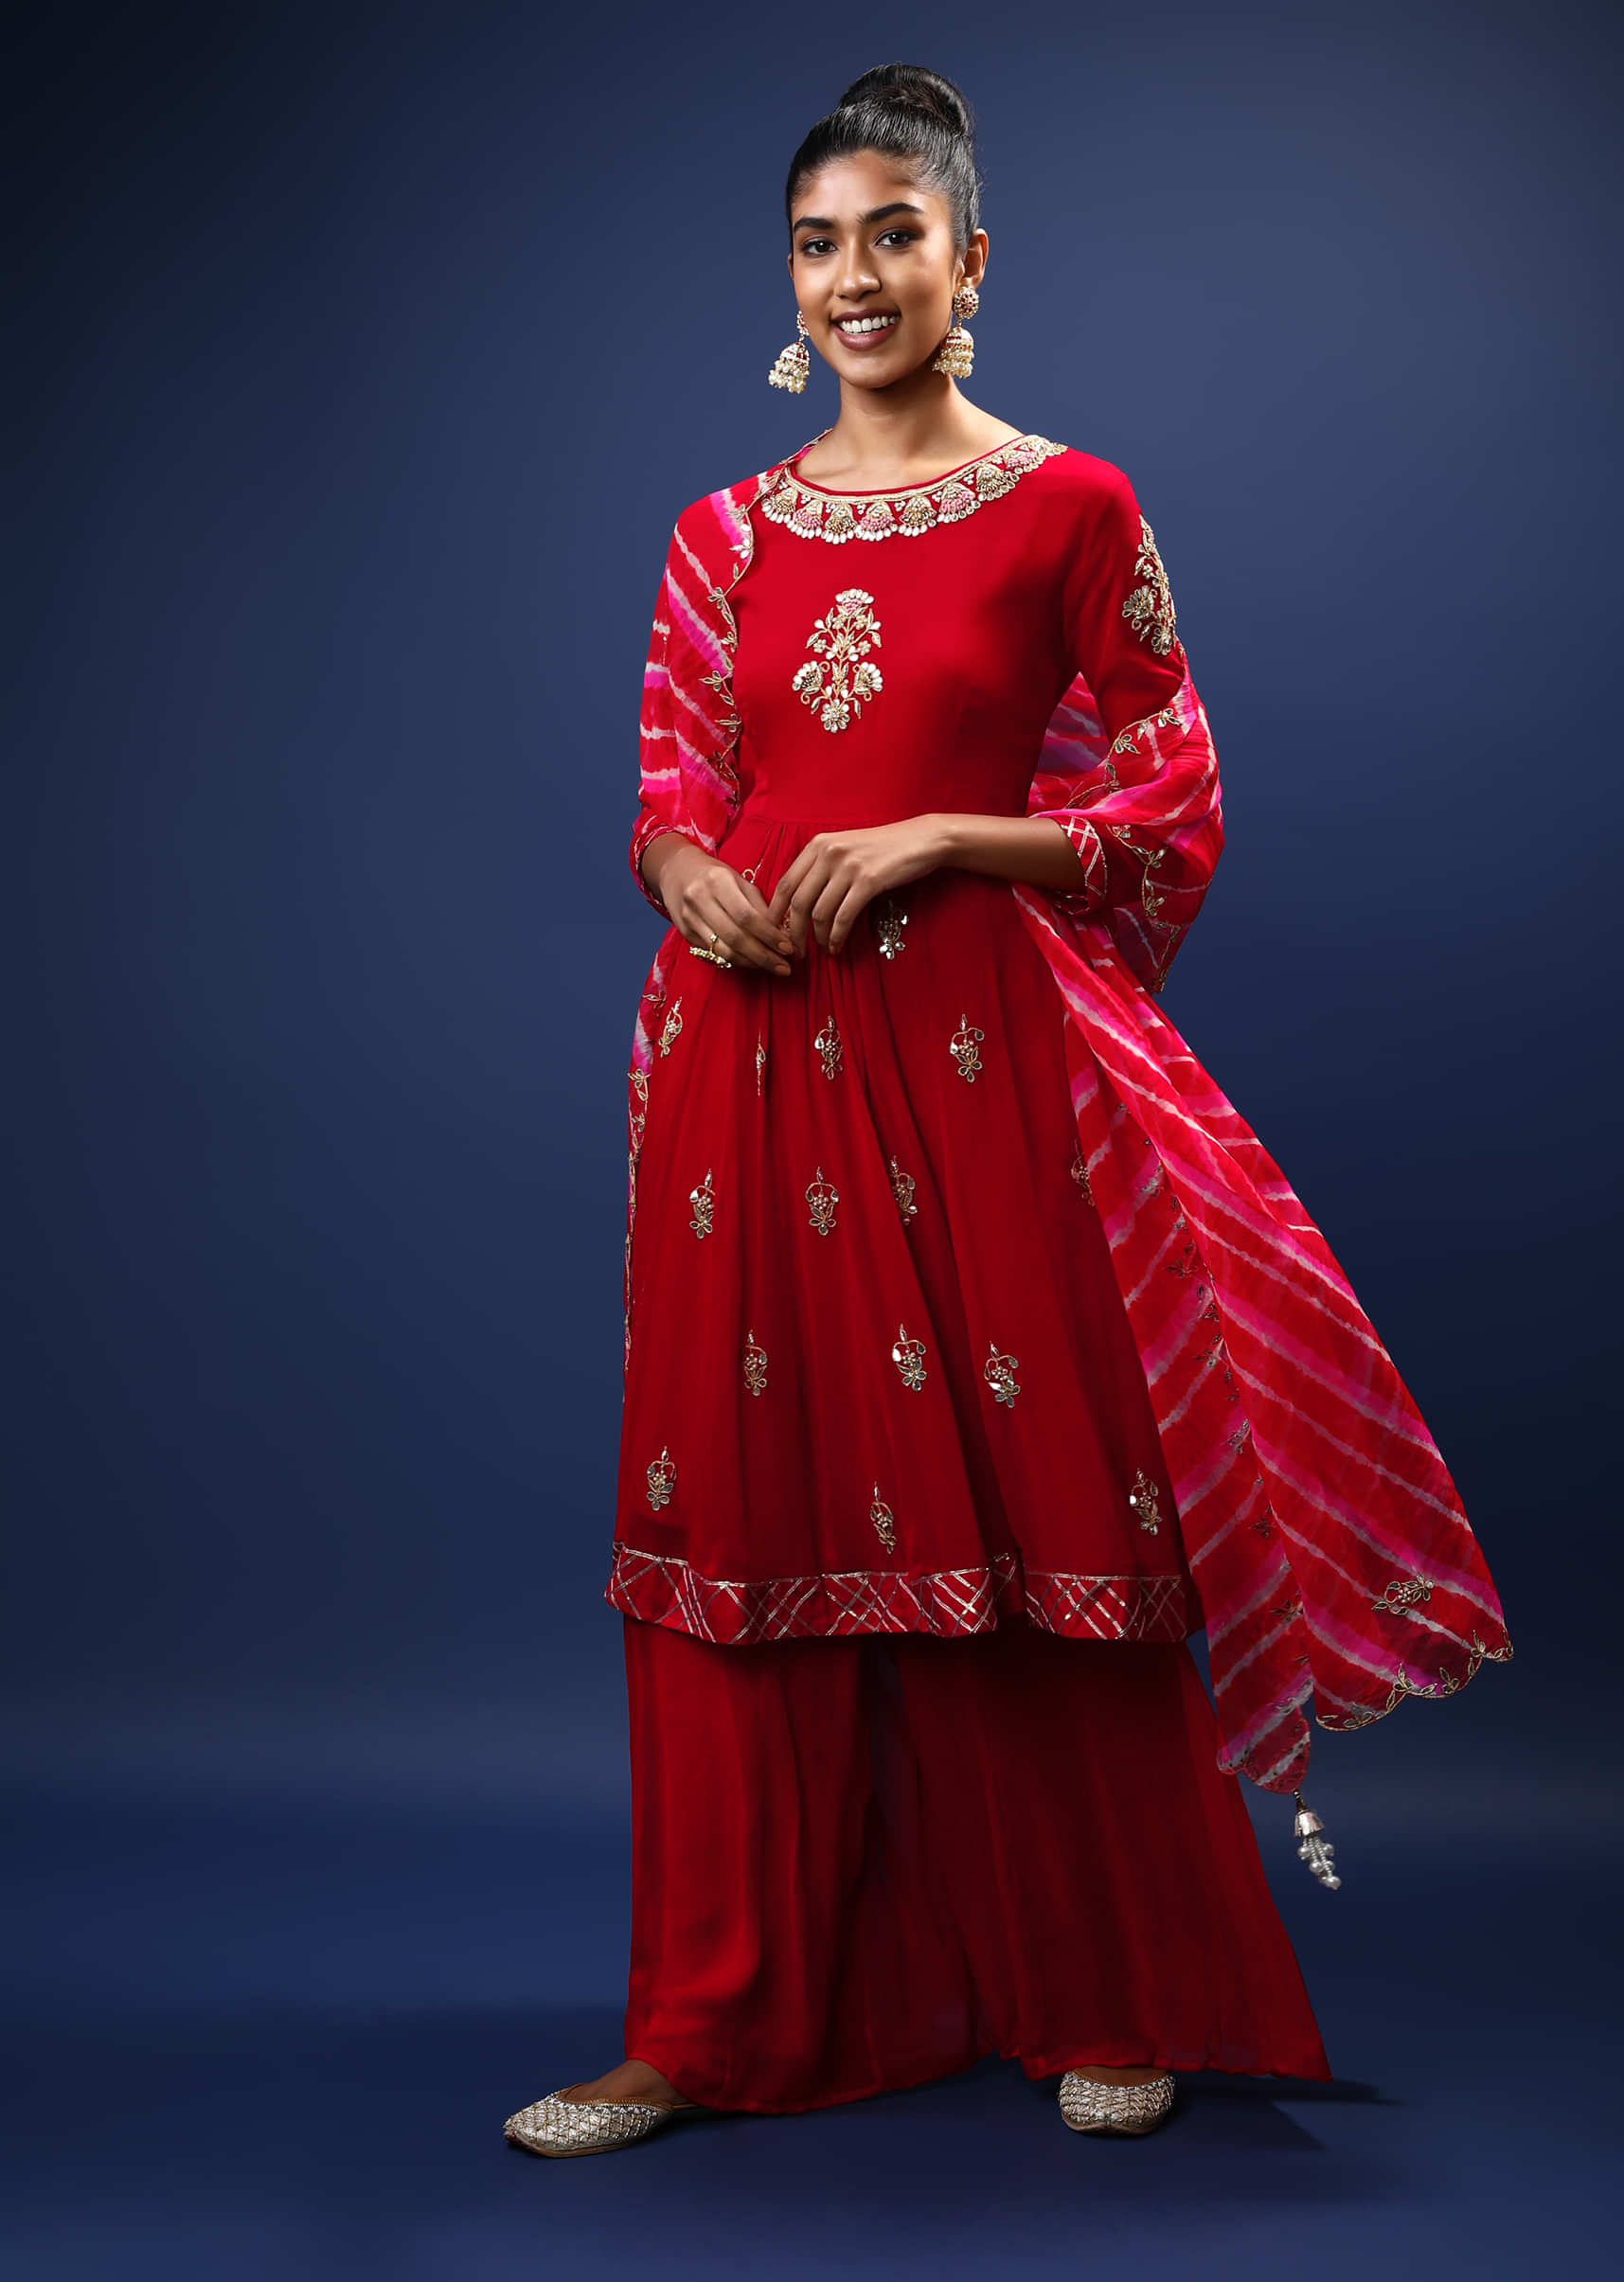 Red Palazzo Suit With A Lehariya Dupatta And Flared Kurti Adorned In Gotta Patti And Zardosi Work In Floral Butti Design  